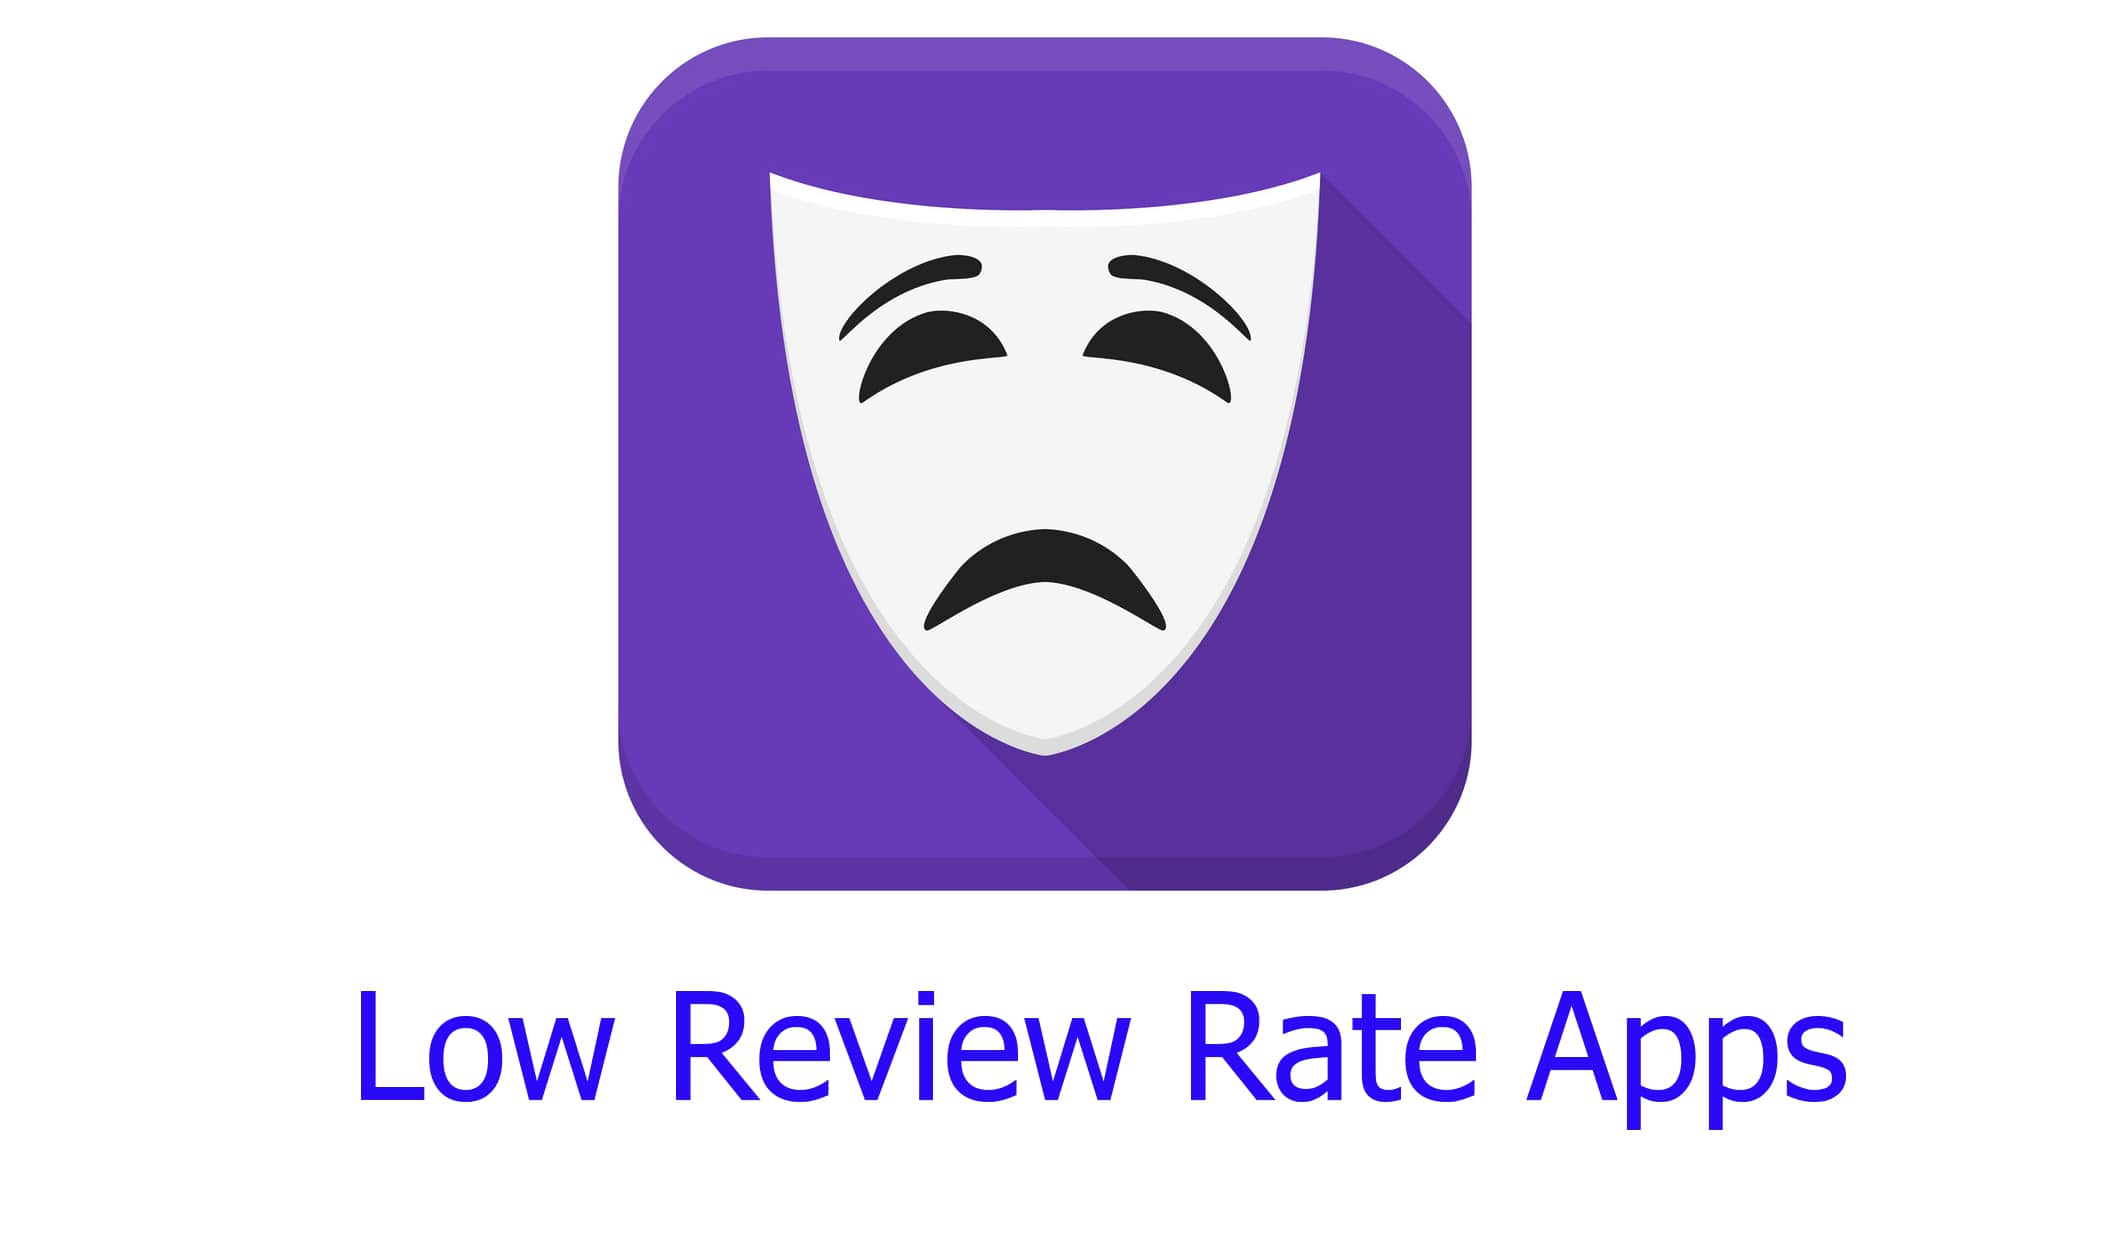 App with low review rate